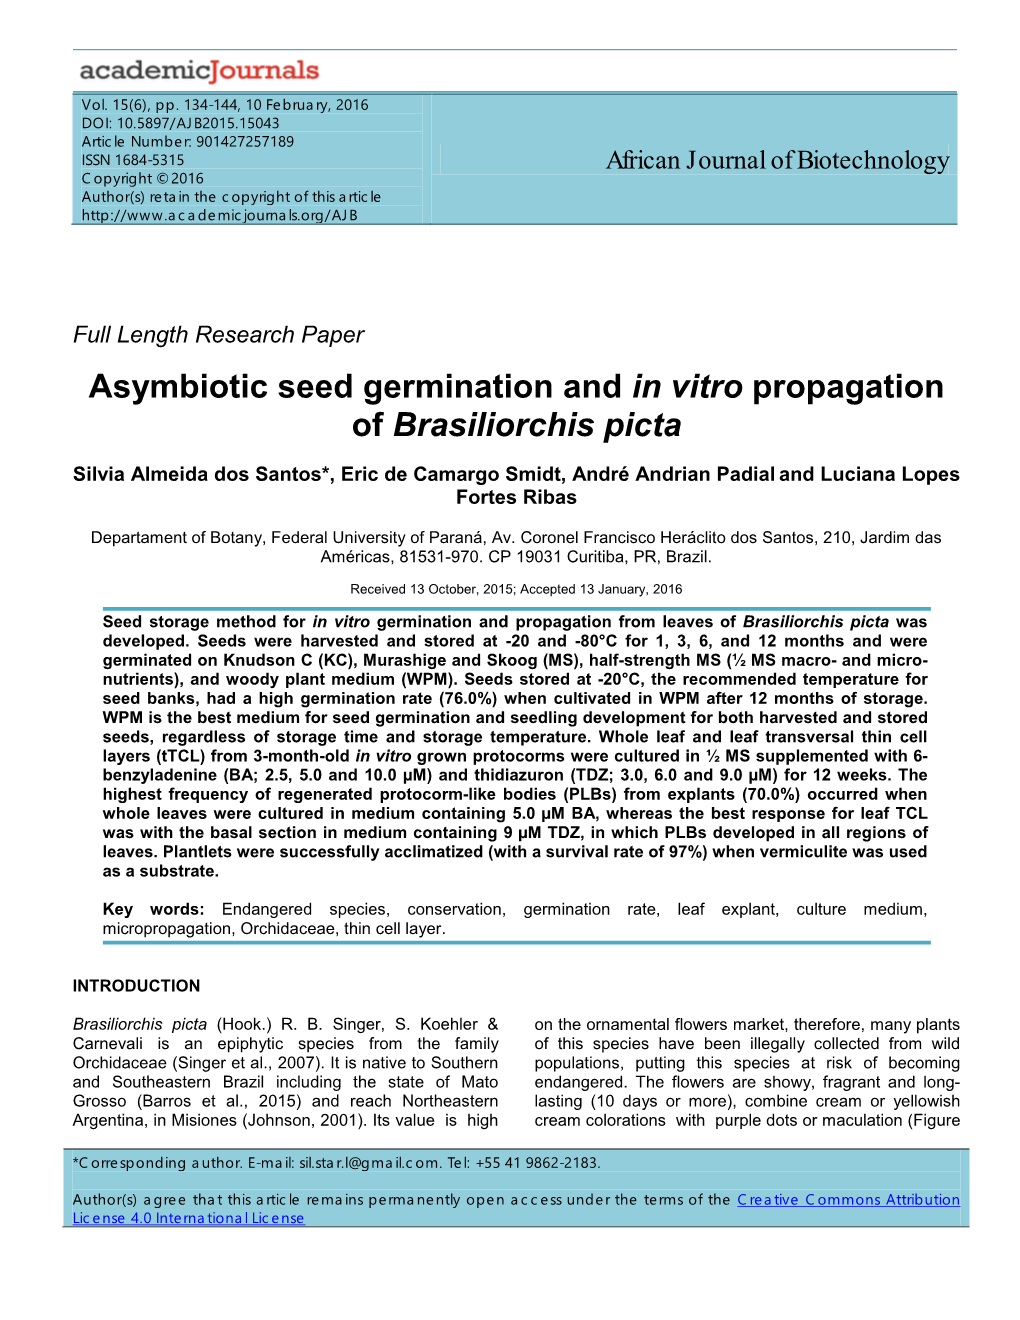 Asymbiotic Seed Germination and in Vitro Propagation of Brasiliorchis Picta